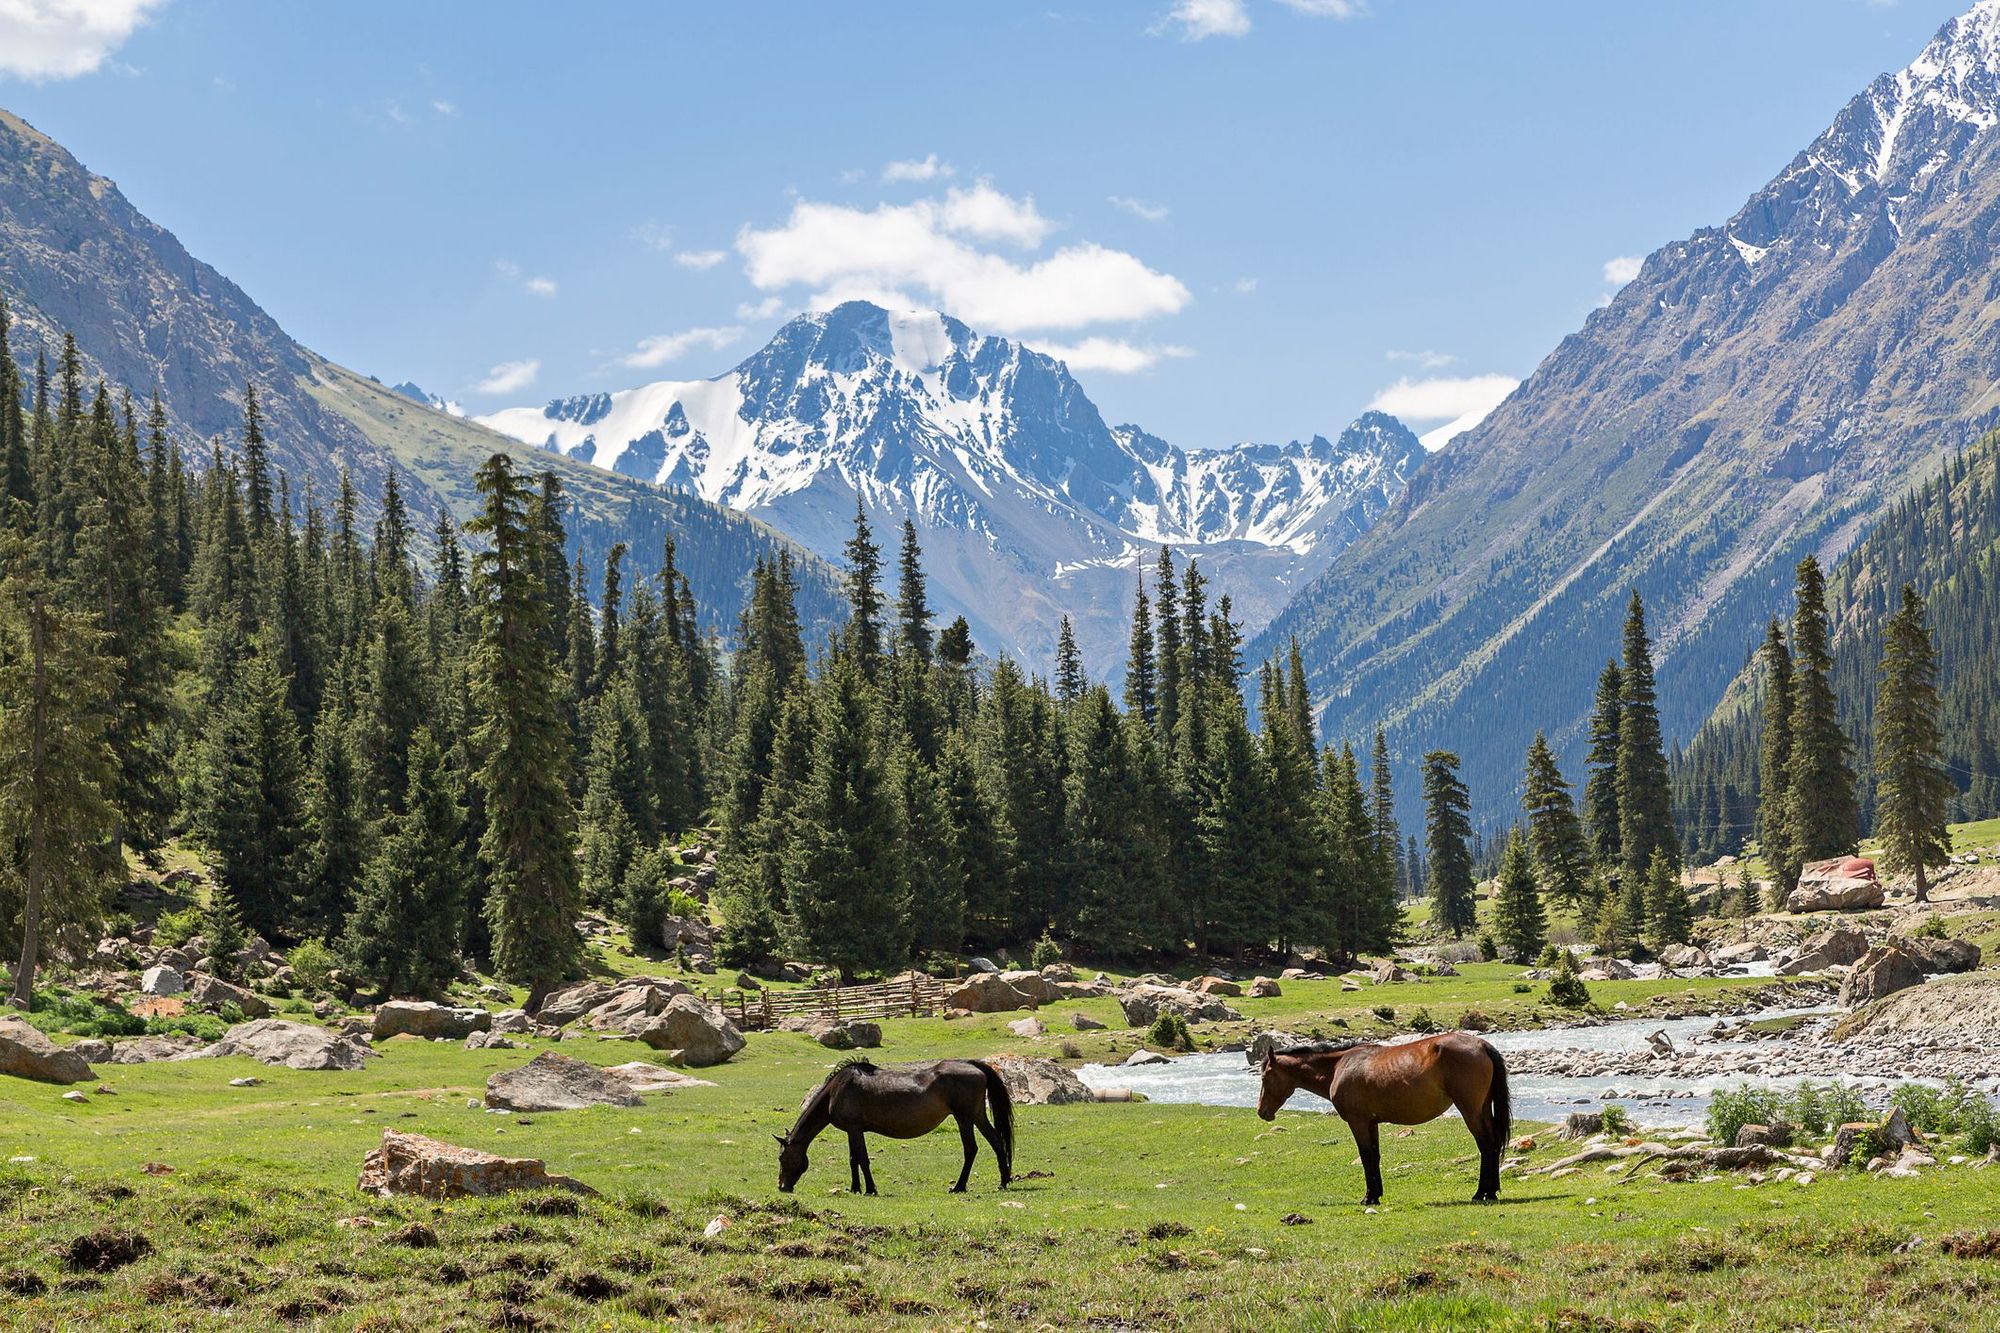 Horses grazing in an alpine meadow in the Tian Shan mountains, with forest and mountains behind.